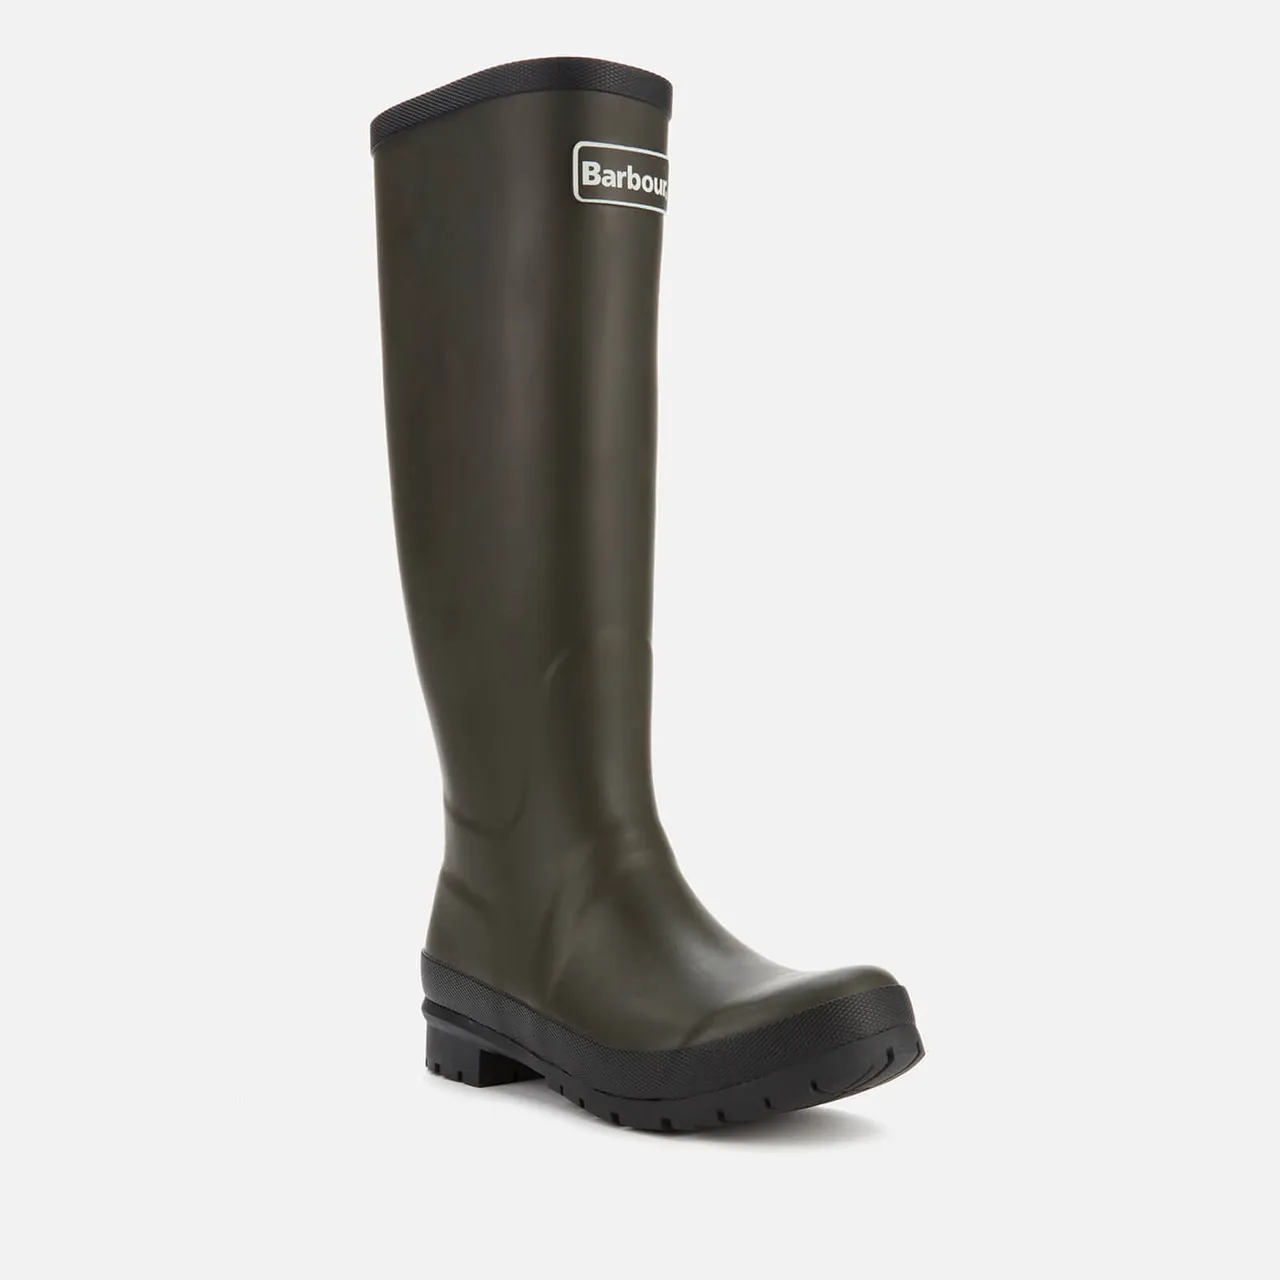 Barbour Women's Abbey Tall Wellies - Olive - UK